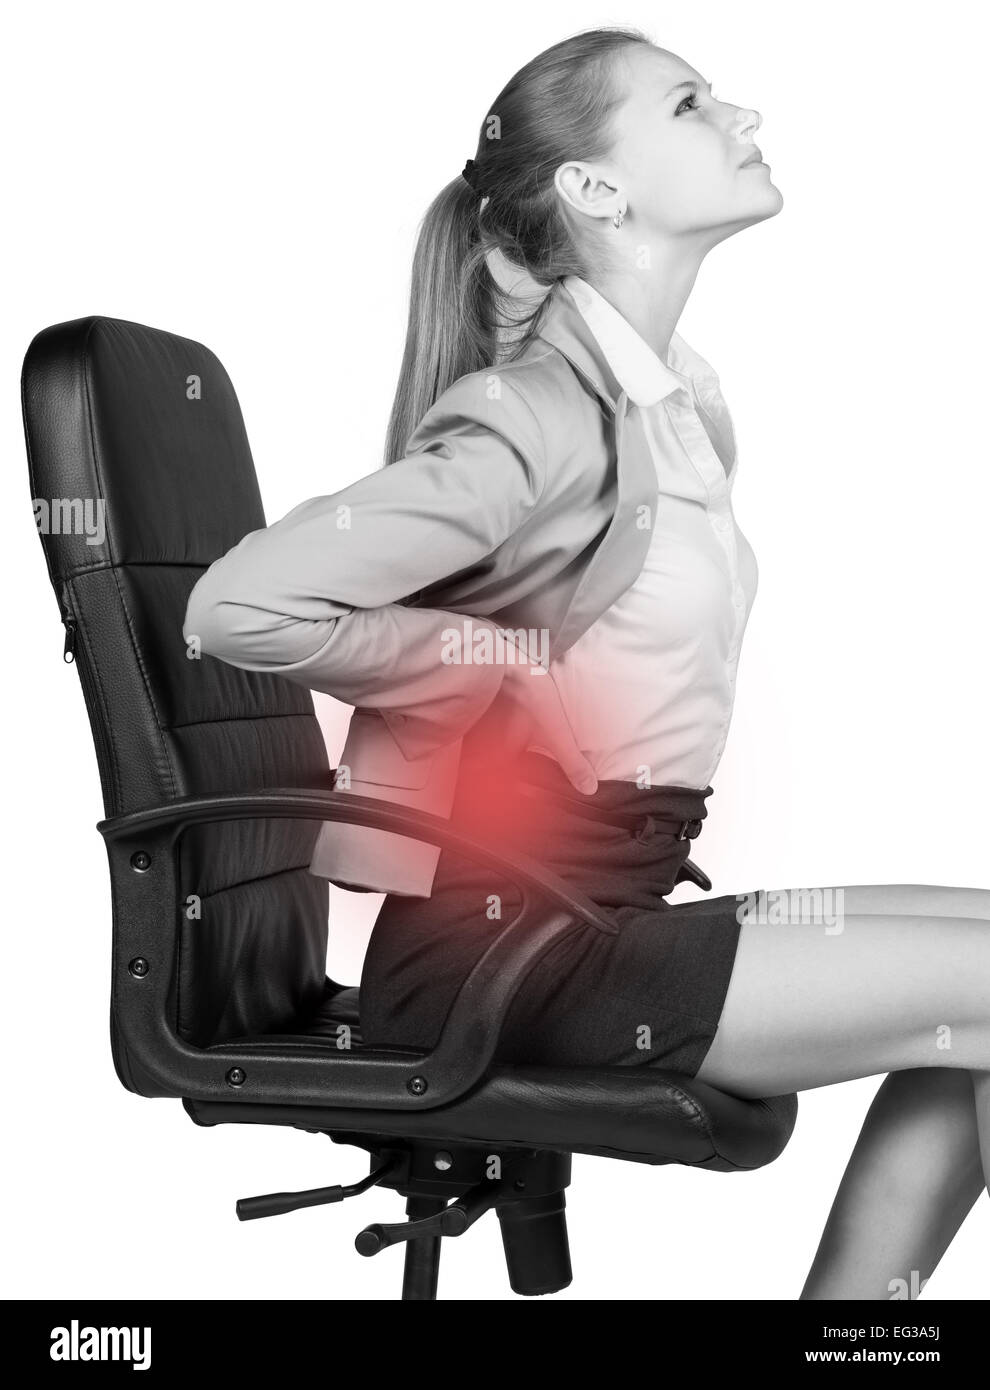 Businesswoman With Lower Back Pain Sitting On Office Chair Stock